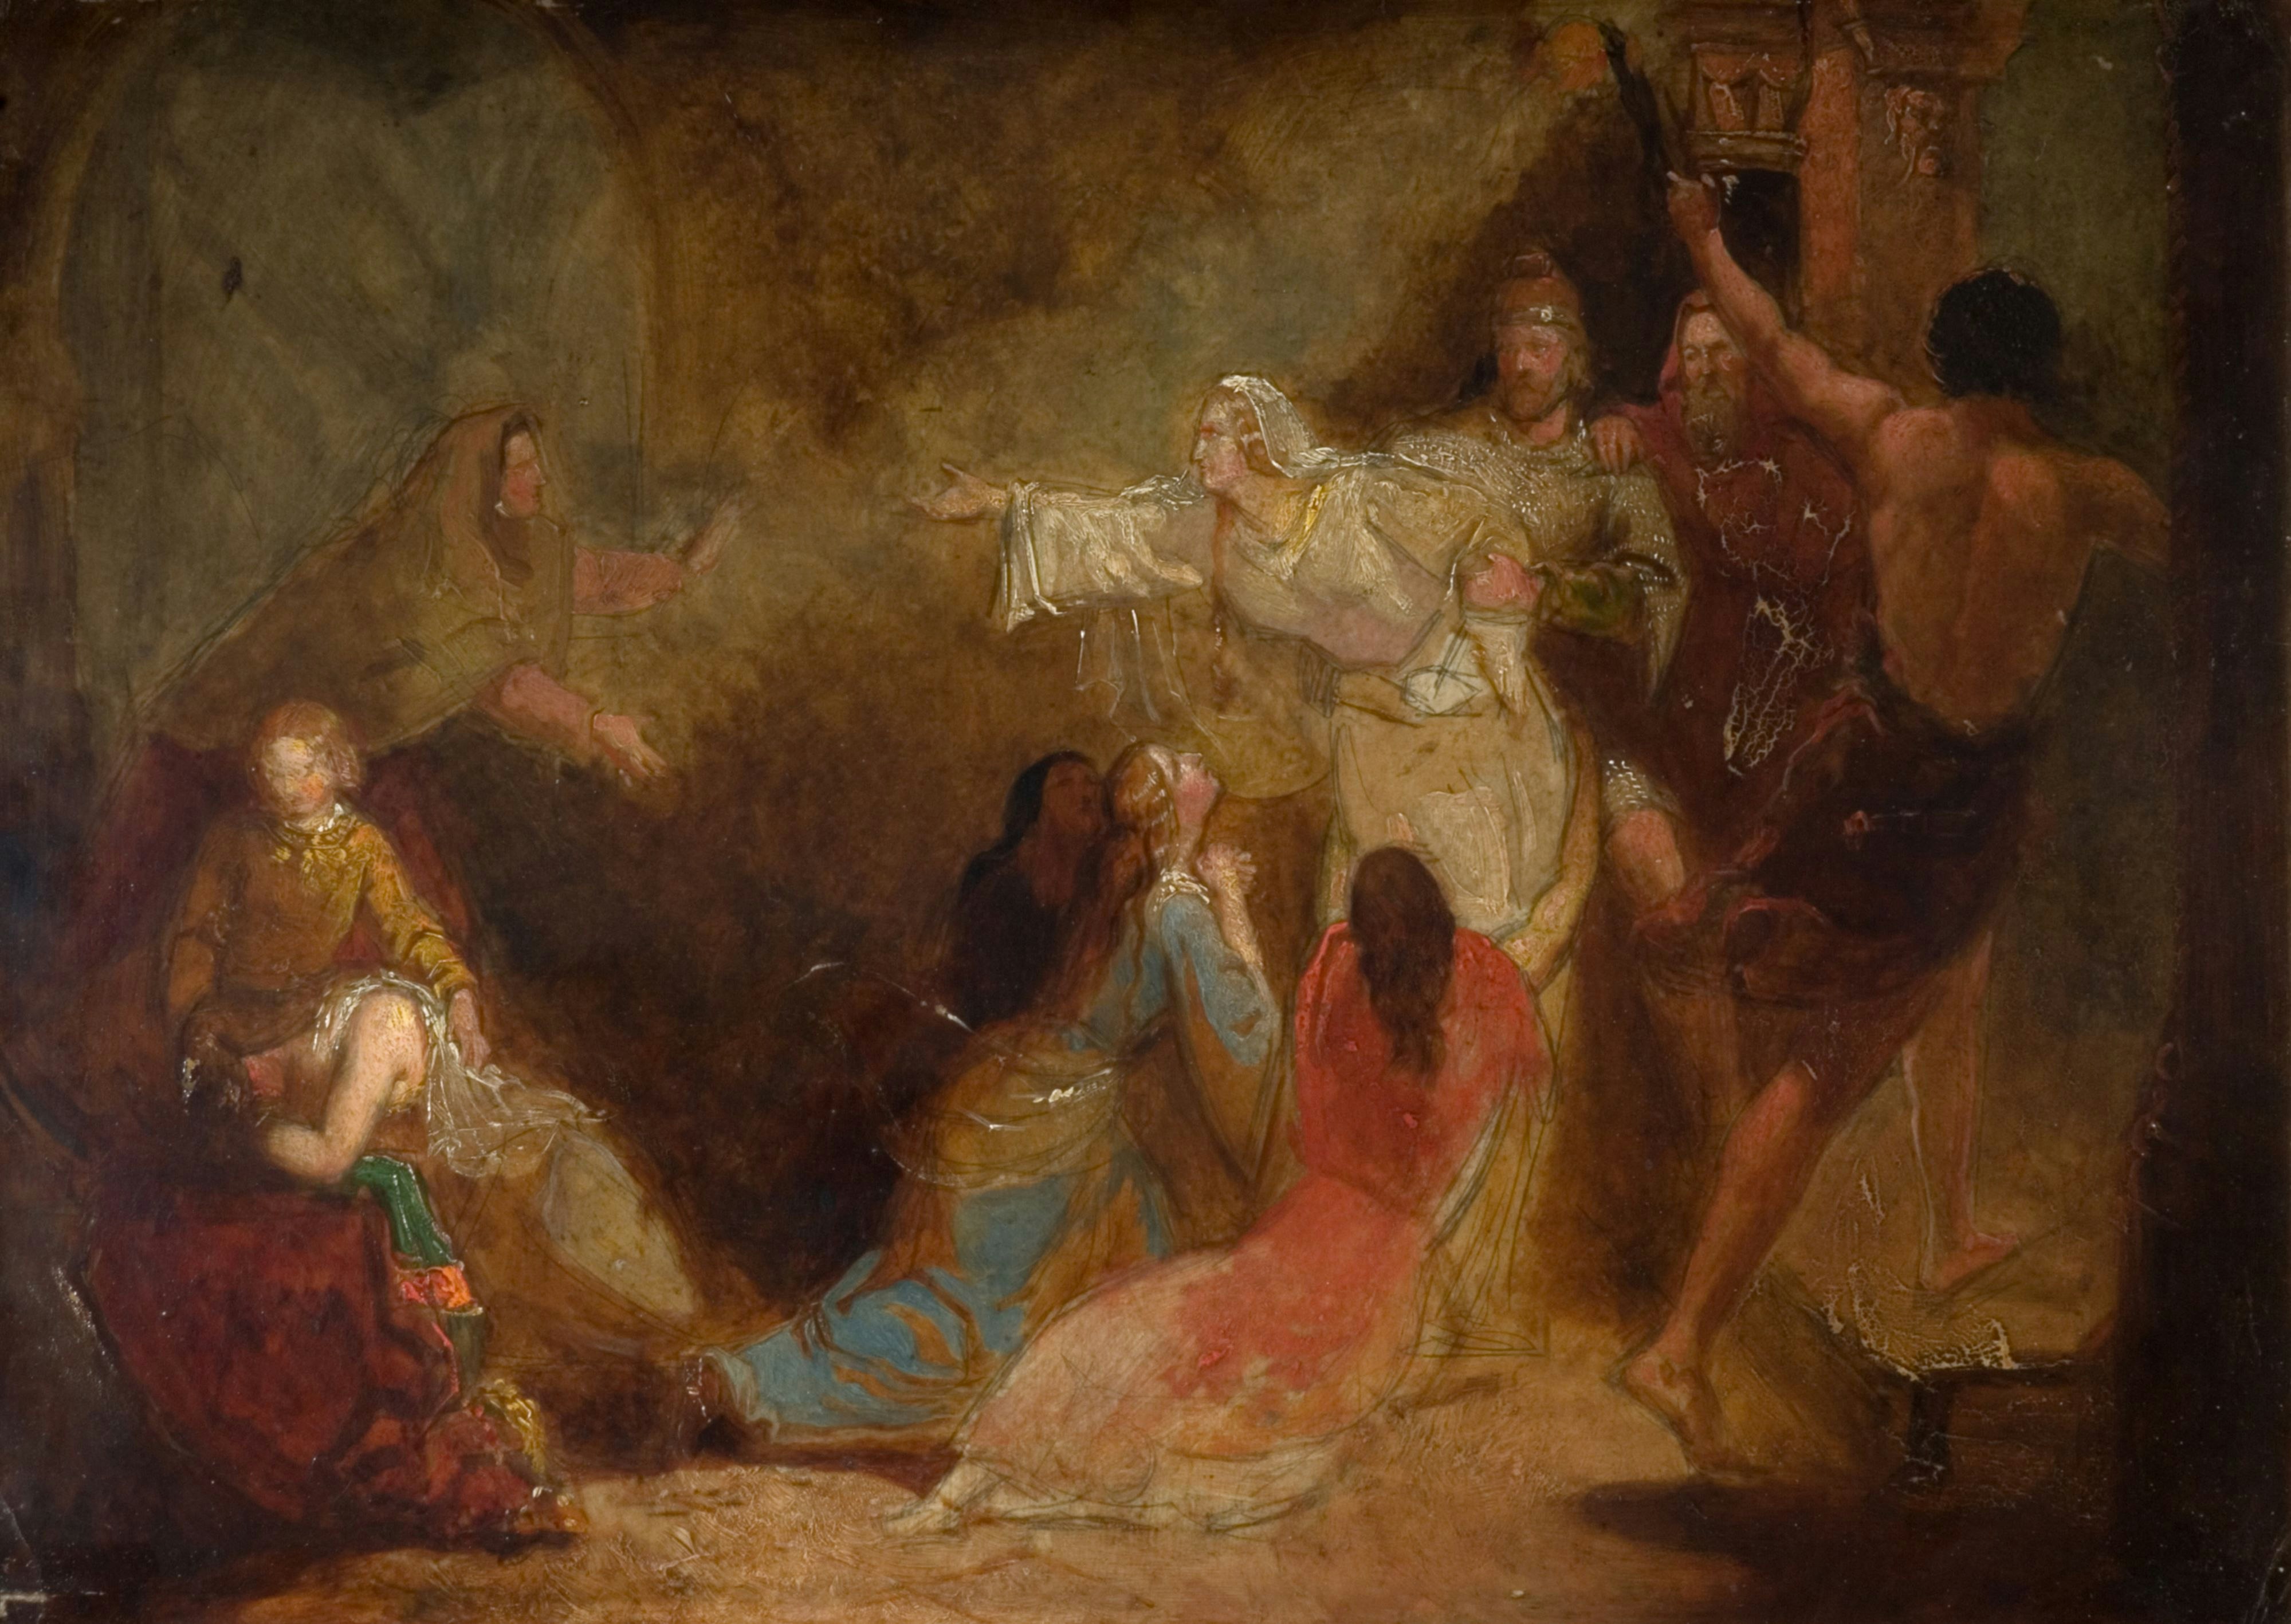 Elgiva seized by order of Archbishop Odo, 1847. By John Everett Millais